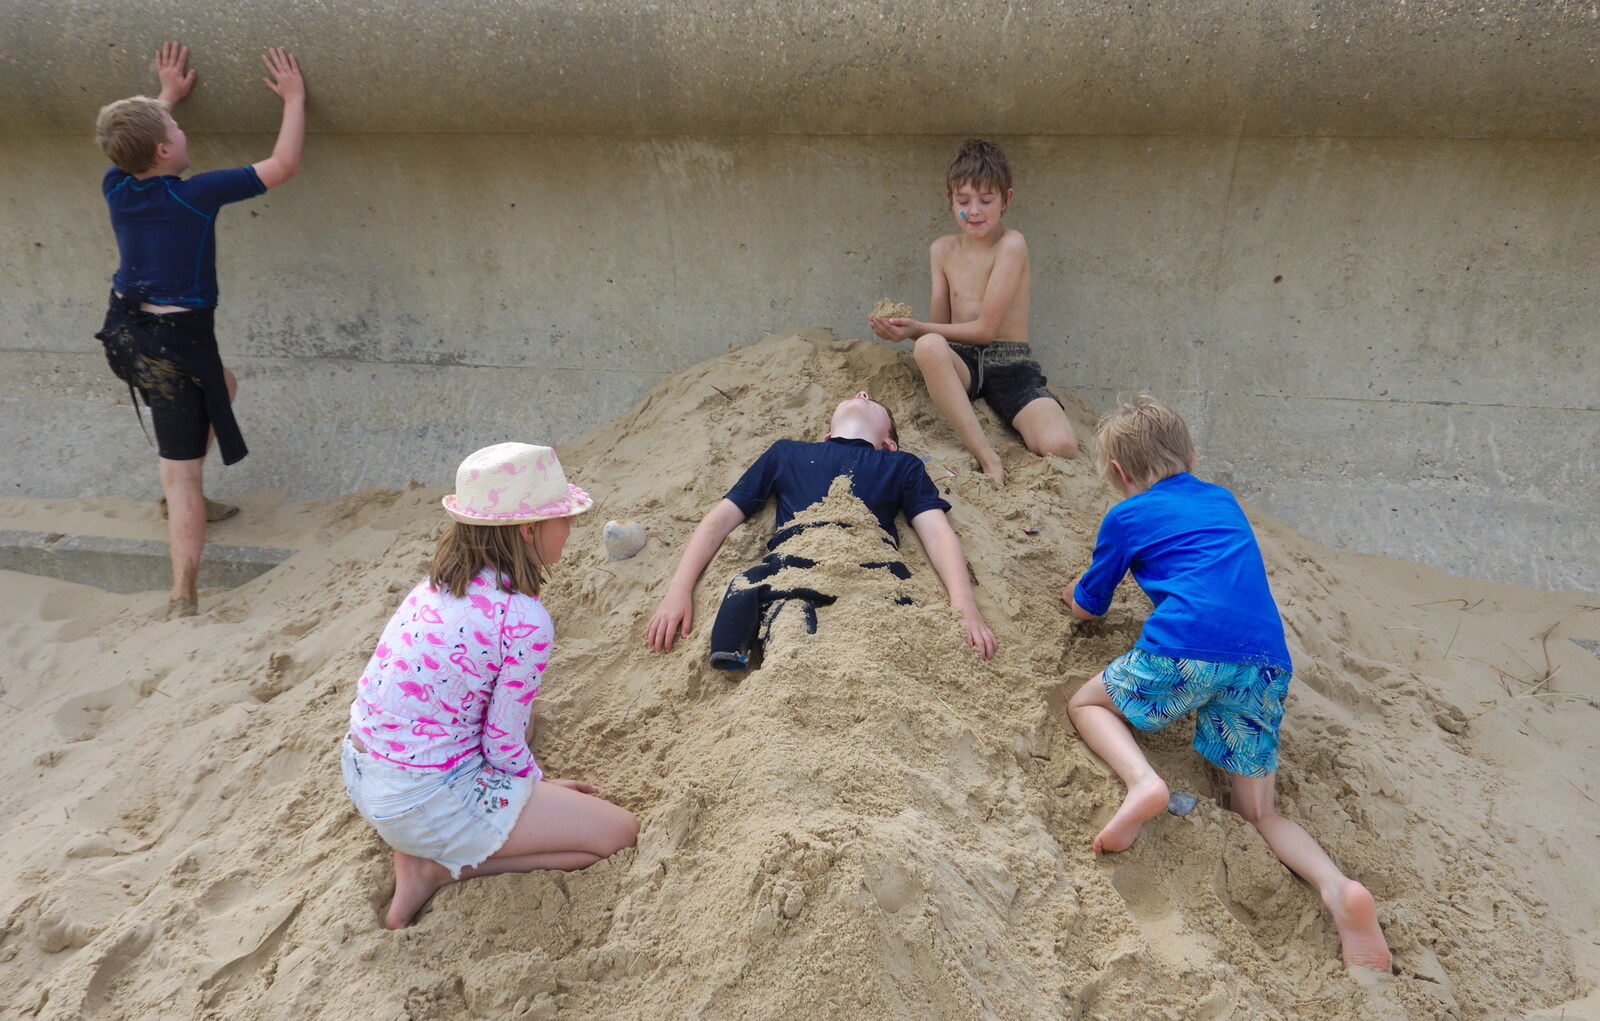 One of the boys is buried in sand from Waxham Sands and the Nelson Head Beer Festival, Horsey, Norfolk - 31st August 2019